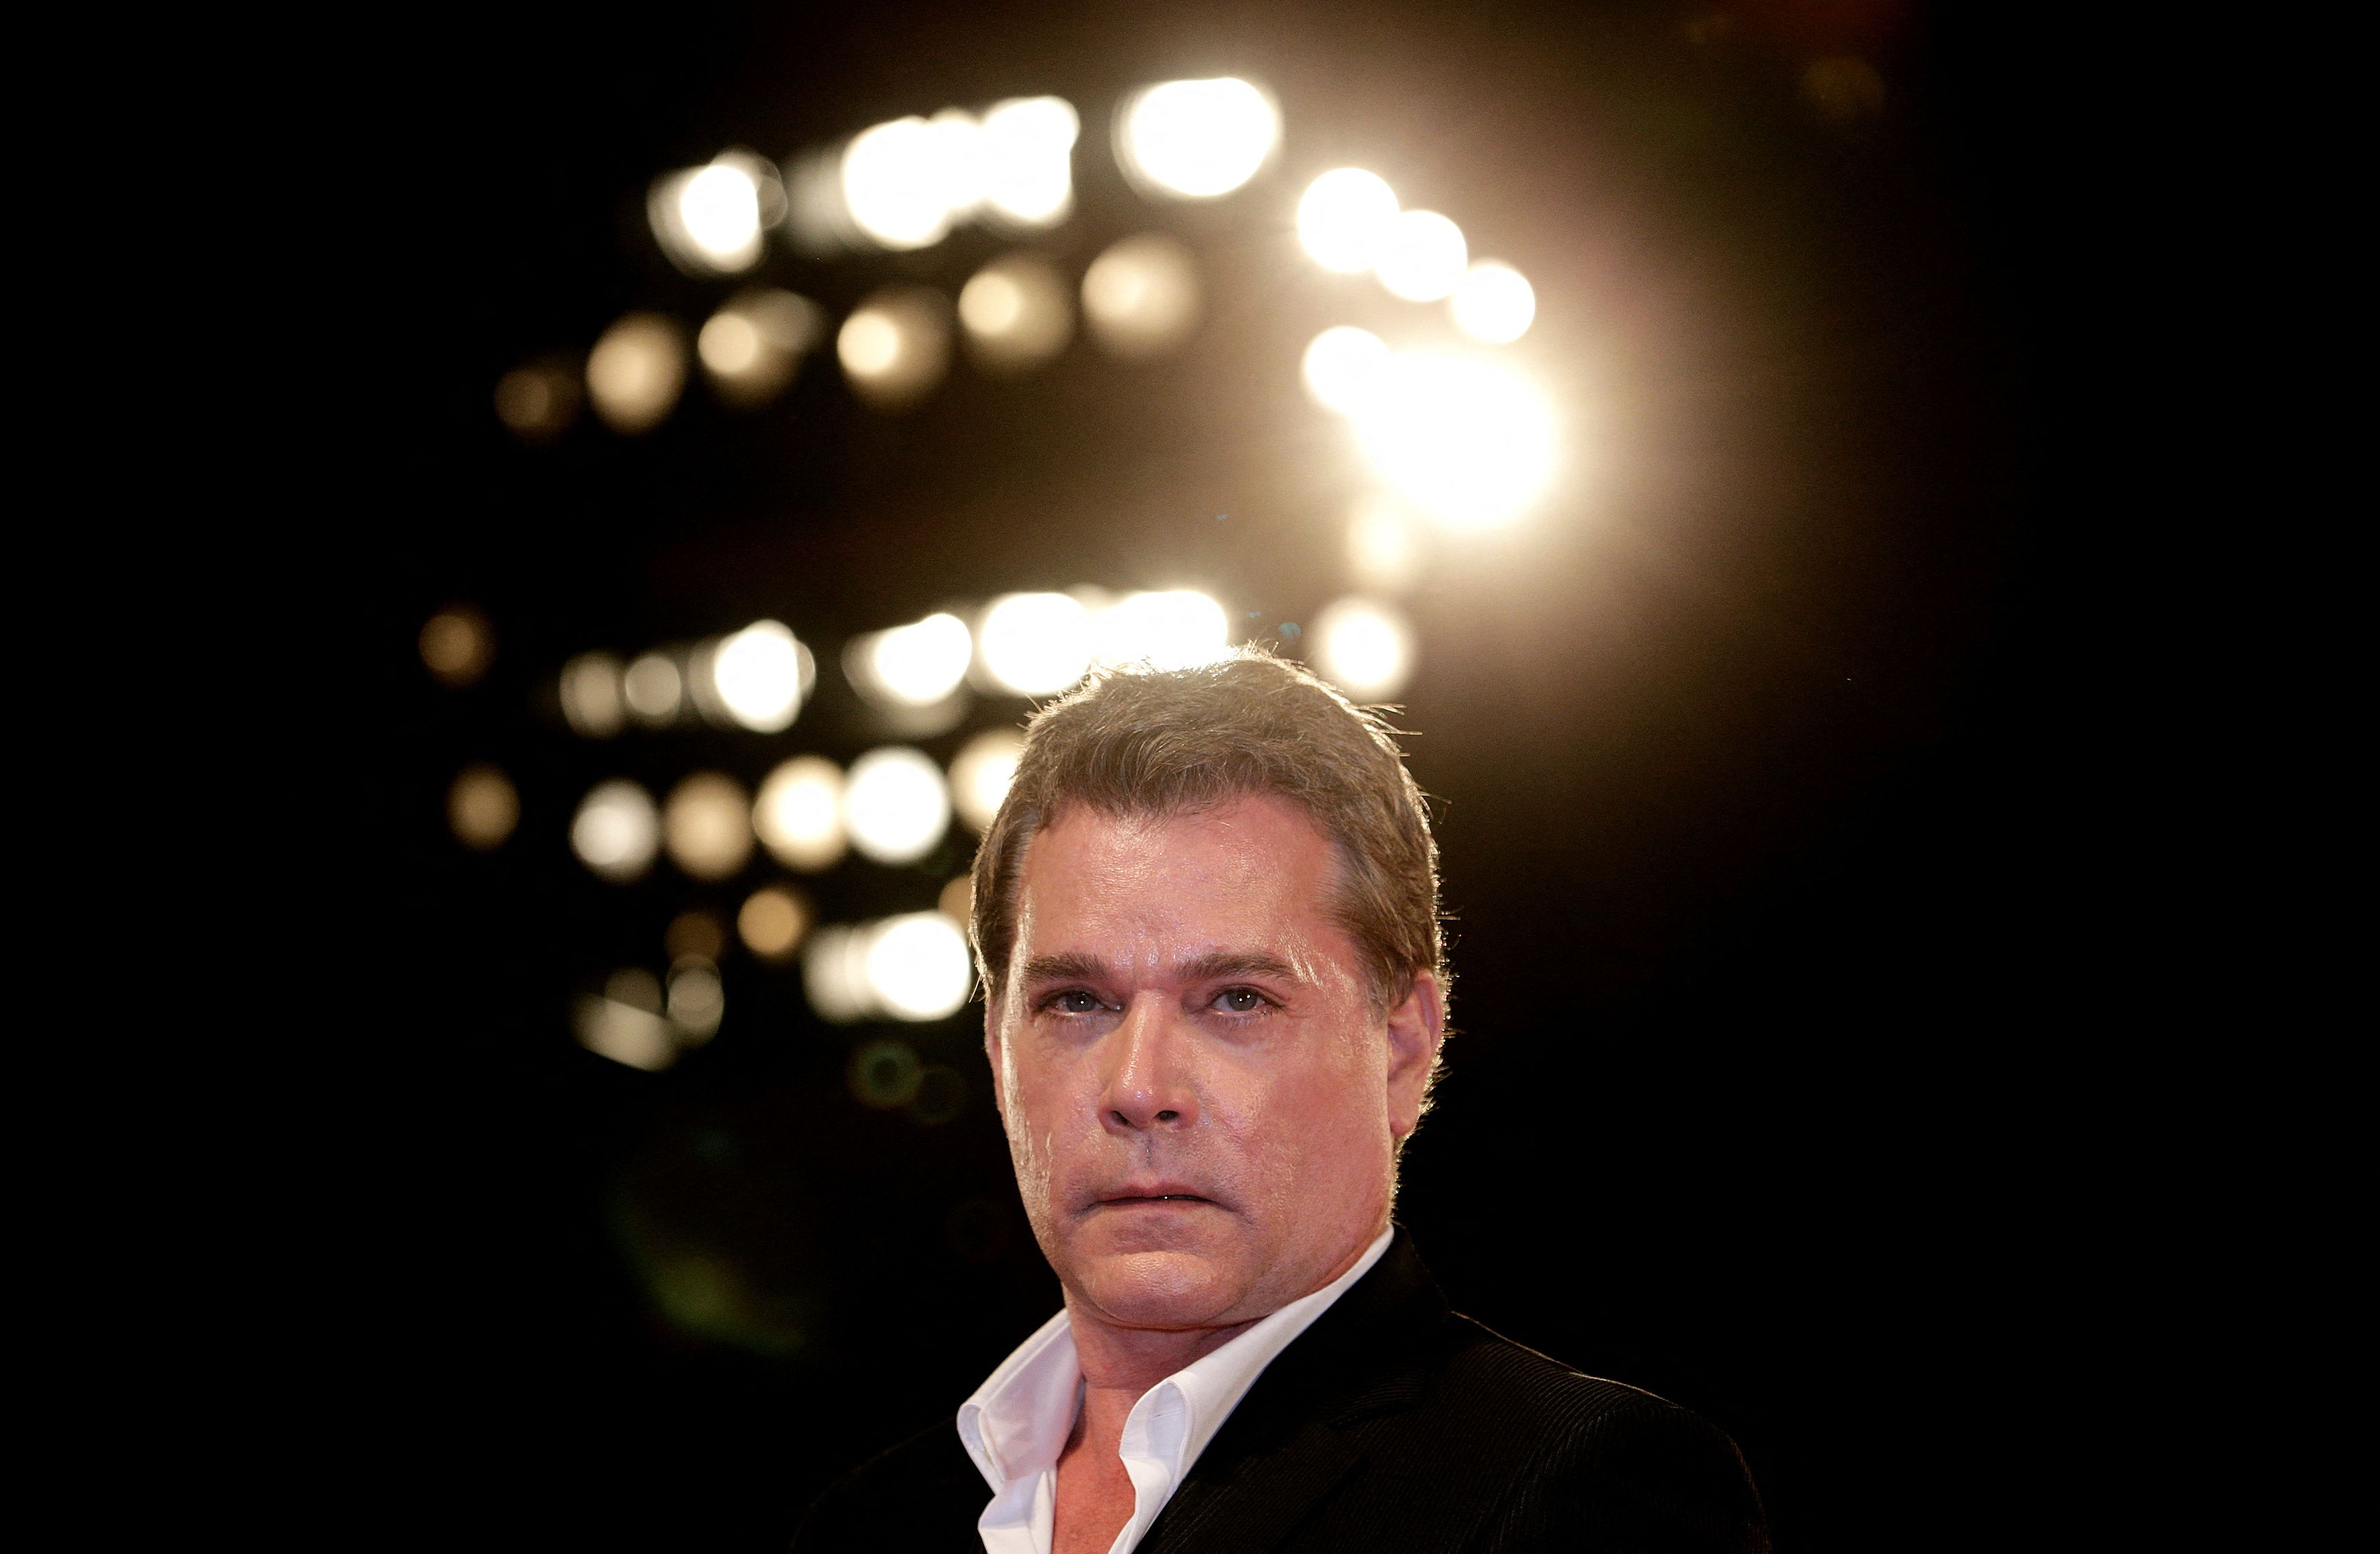 U.S. actor Liotta poses during the red carpet for the movie 